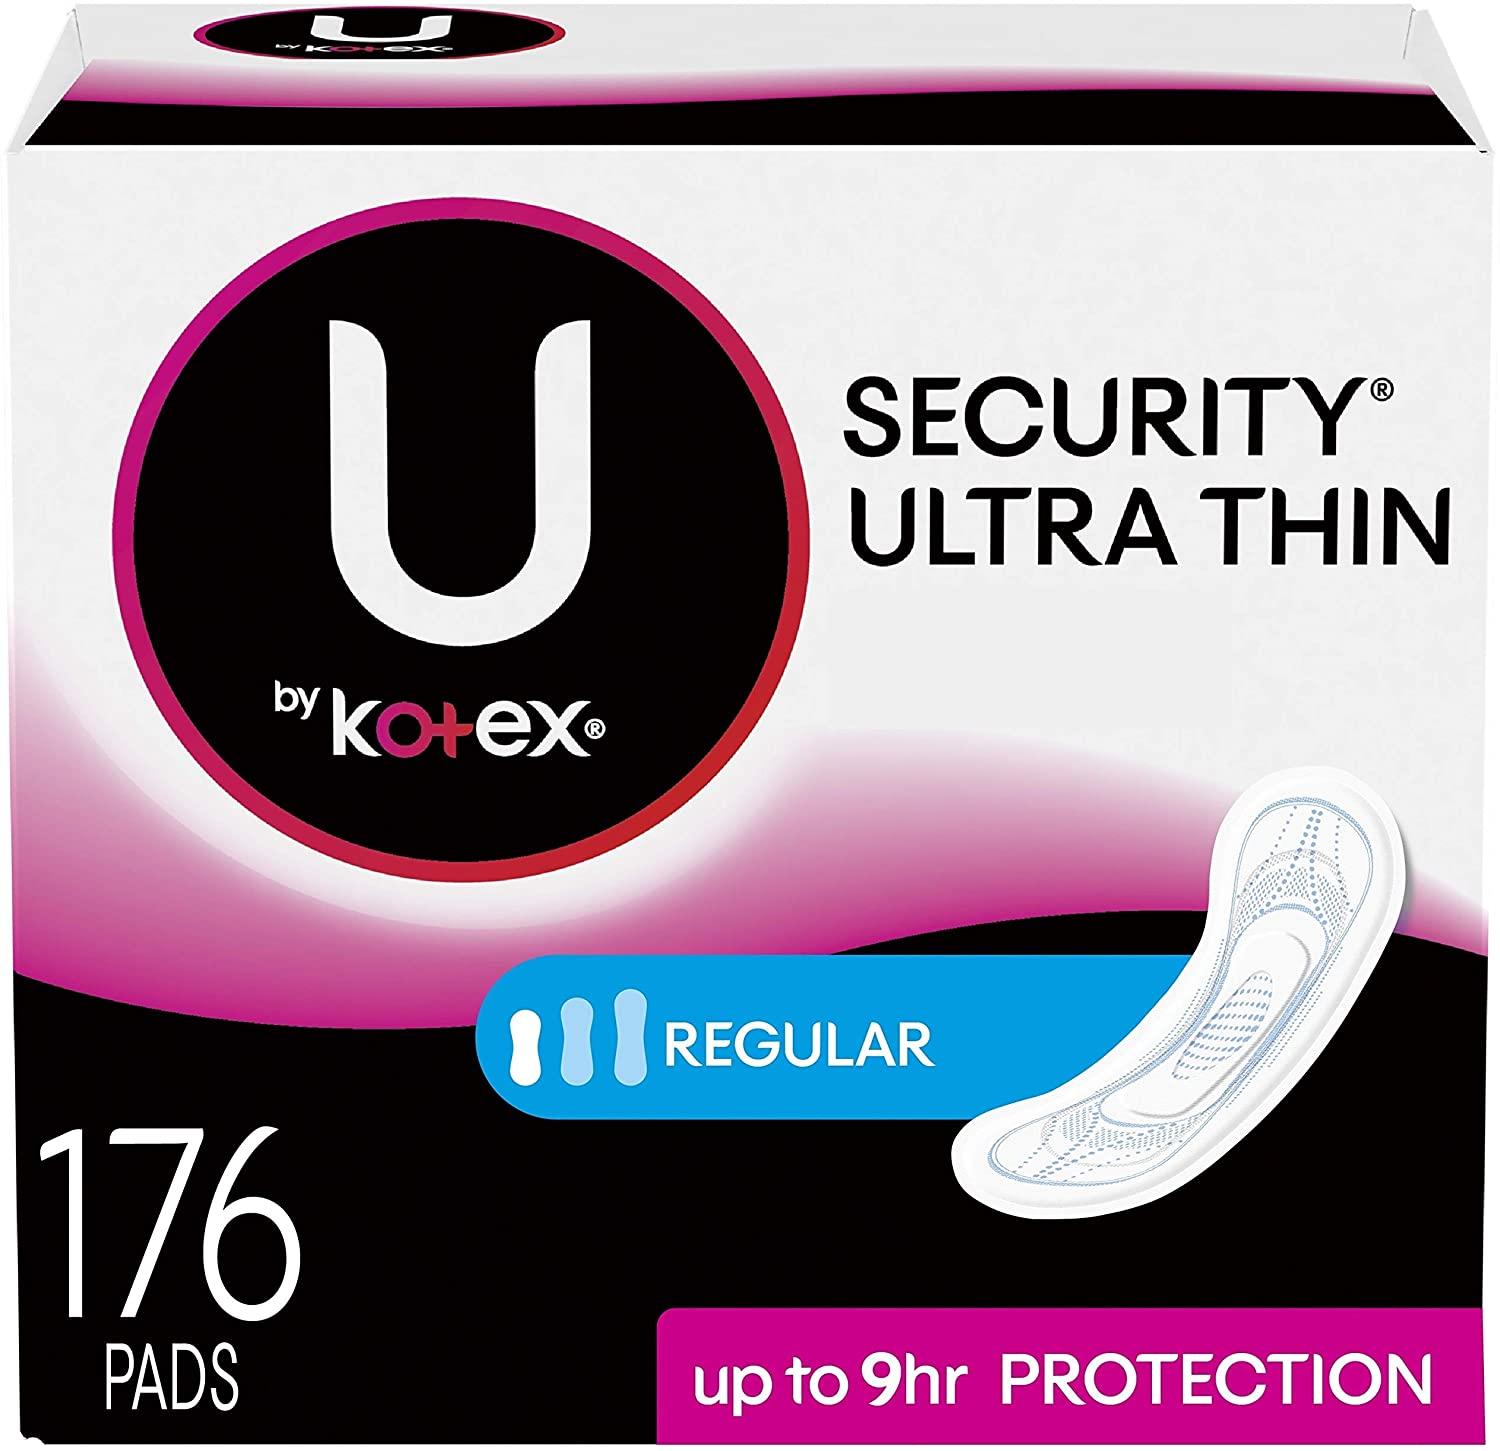 176 U by Kotex Security Ultra Thin Feminine Pads for $11.26 Shipped